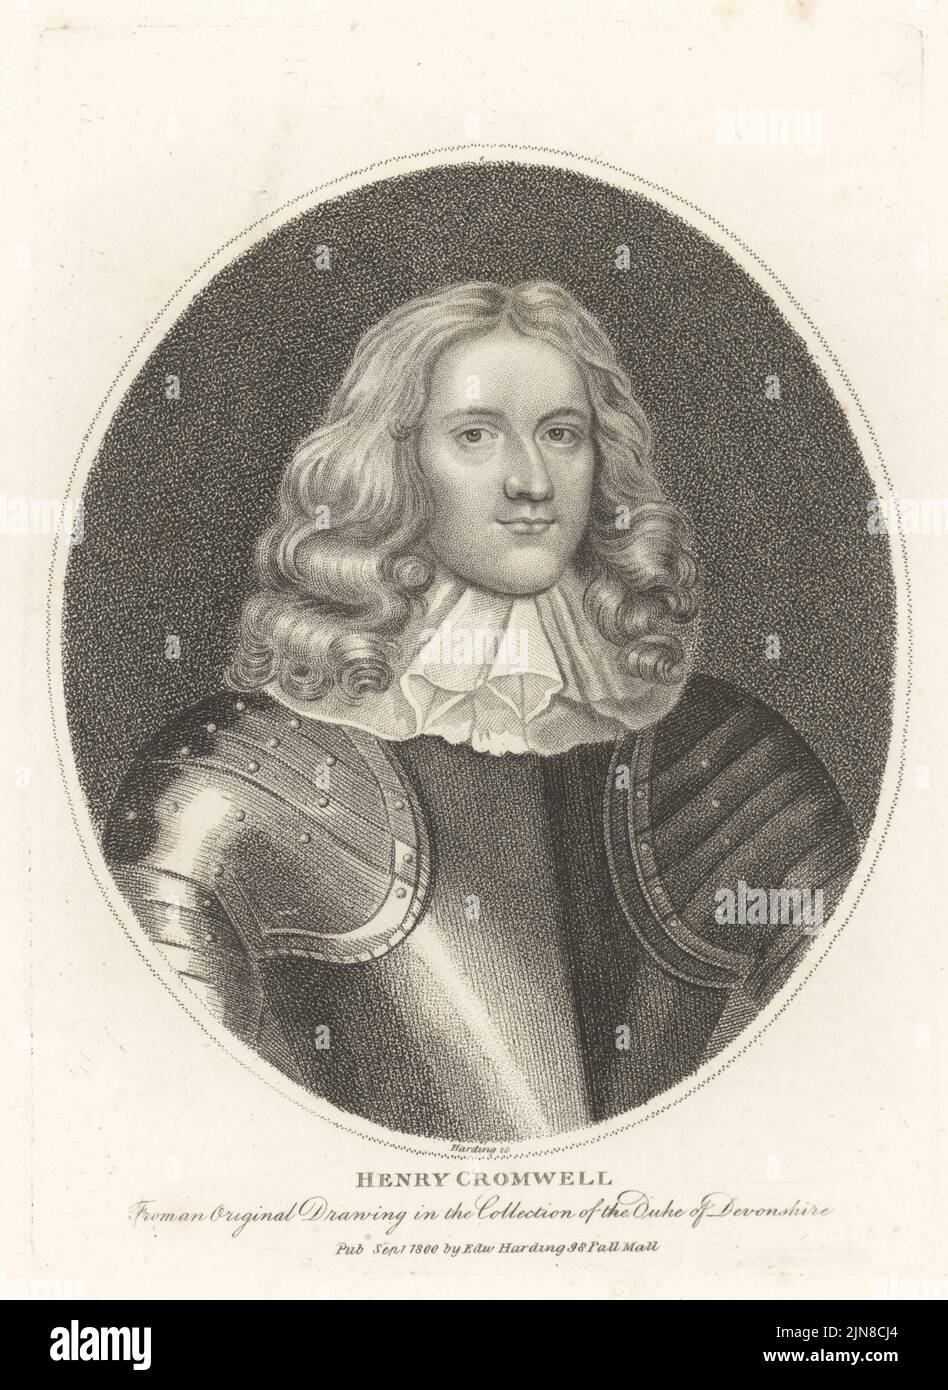 Henry Cromwell, English statesman, 4th son of Oliver Cromwell, important figure in the Parliamentarian regime in Ireland, 1628-1674. In white collar and suit of plate armour. From an original drawing in the collection of the Duke of Devonshire. Copperplate engraving by Edward Harding from John Adolphus’ The British Cabinet, containing Portraits of Illustrious Personages, printed by T. Bensley for E. Harding, 98 Pall Mall, London, 1799. Stock Photo